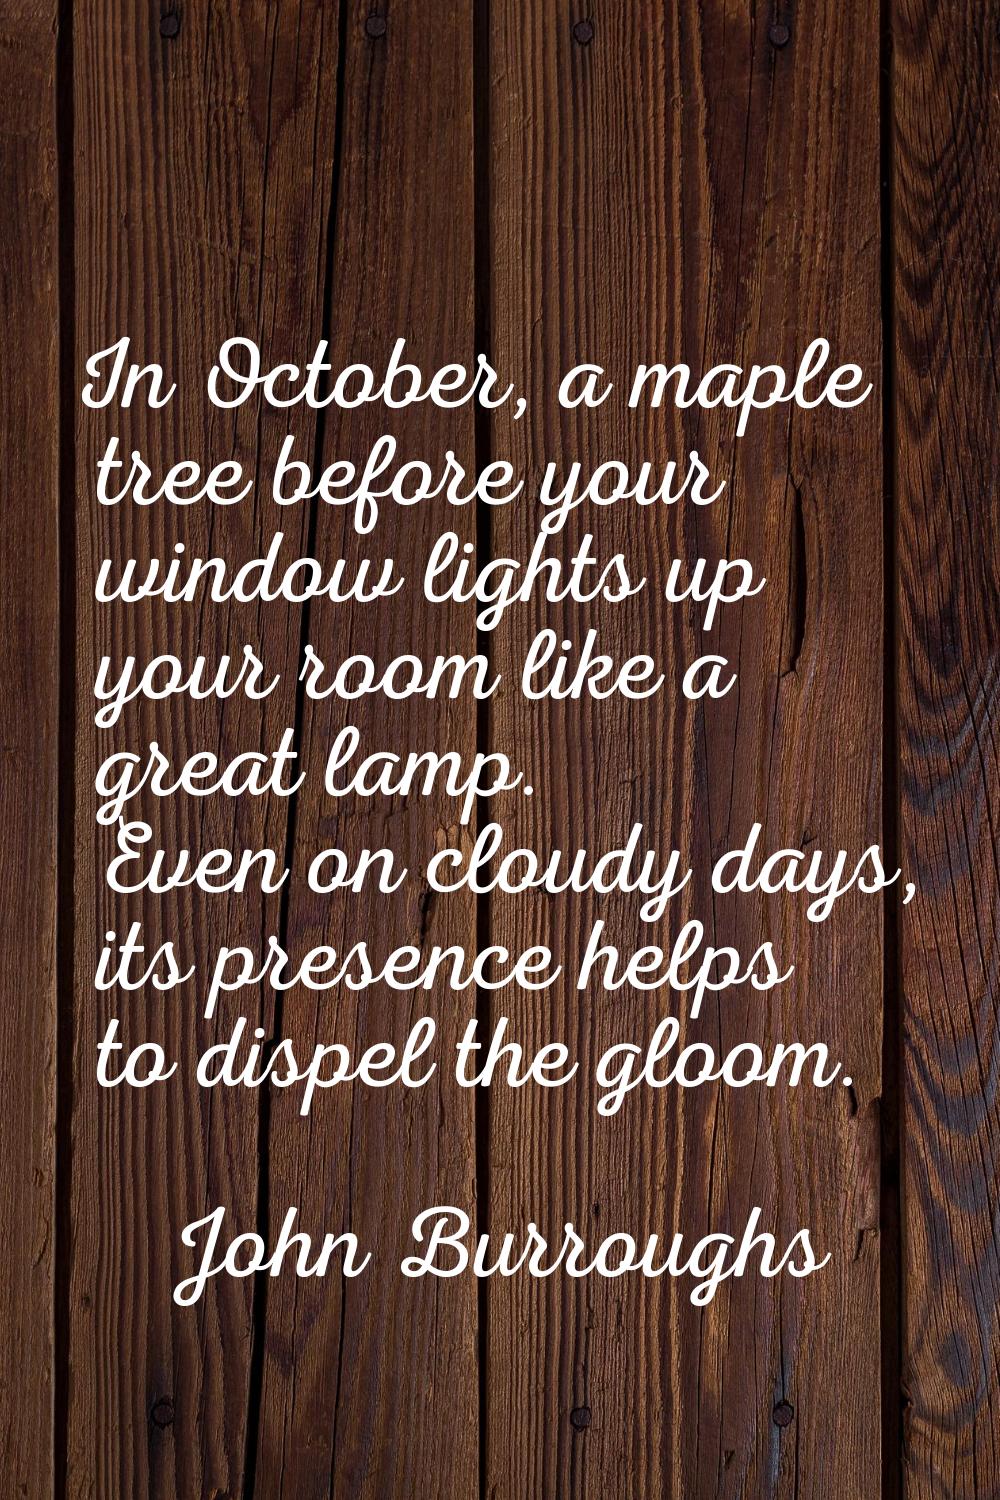 In October, a maple tree before your window lights up your room like a great lamp. Even on cloudy d